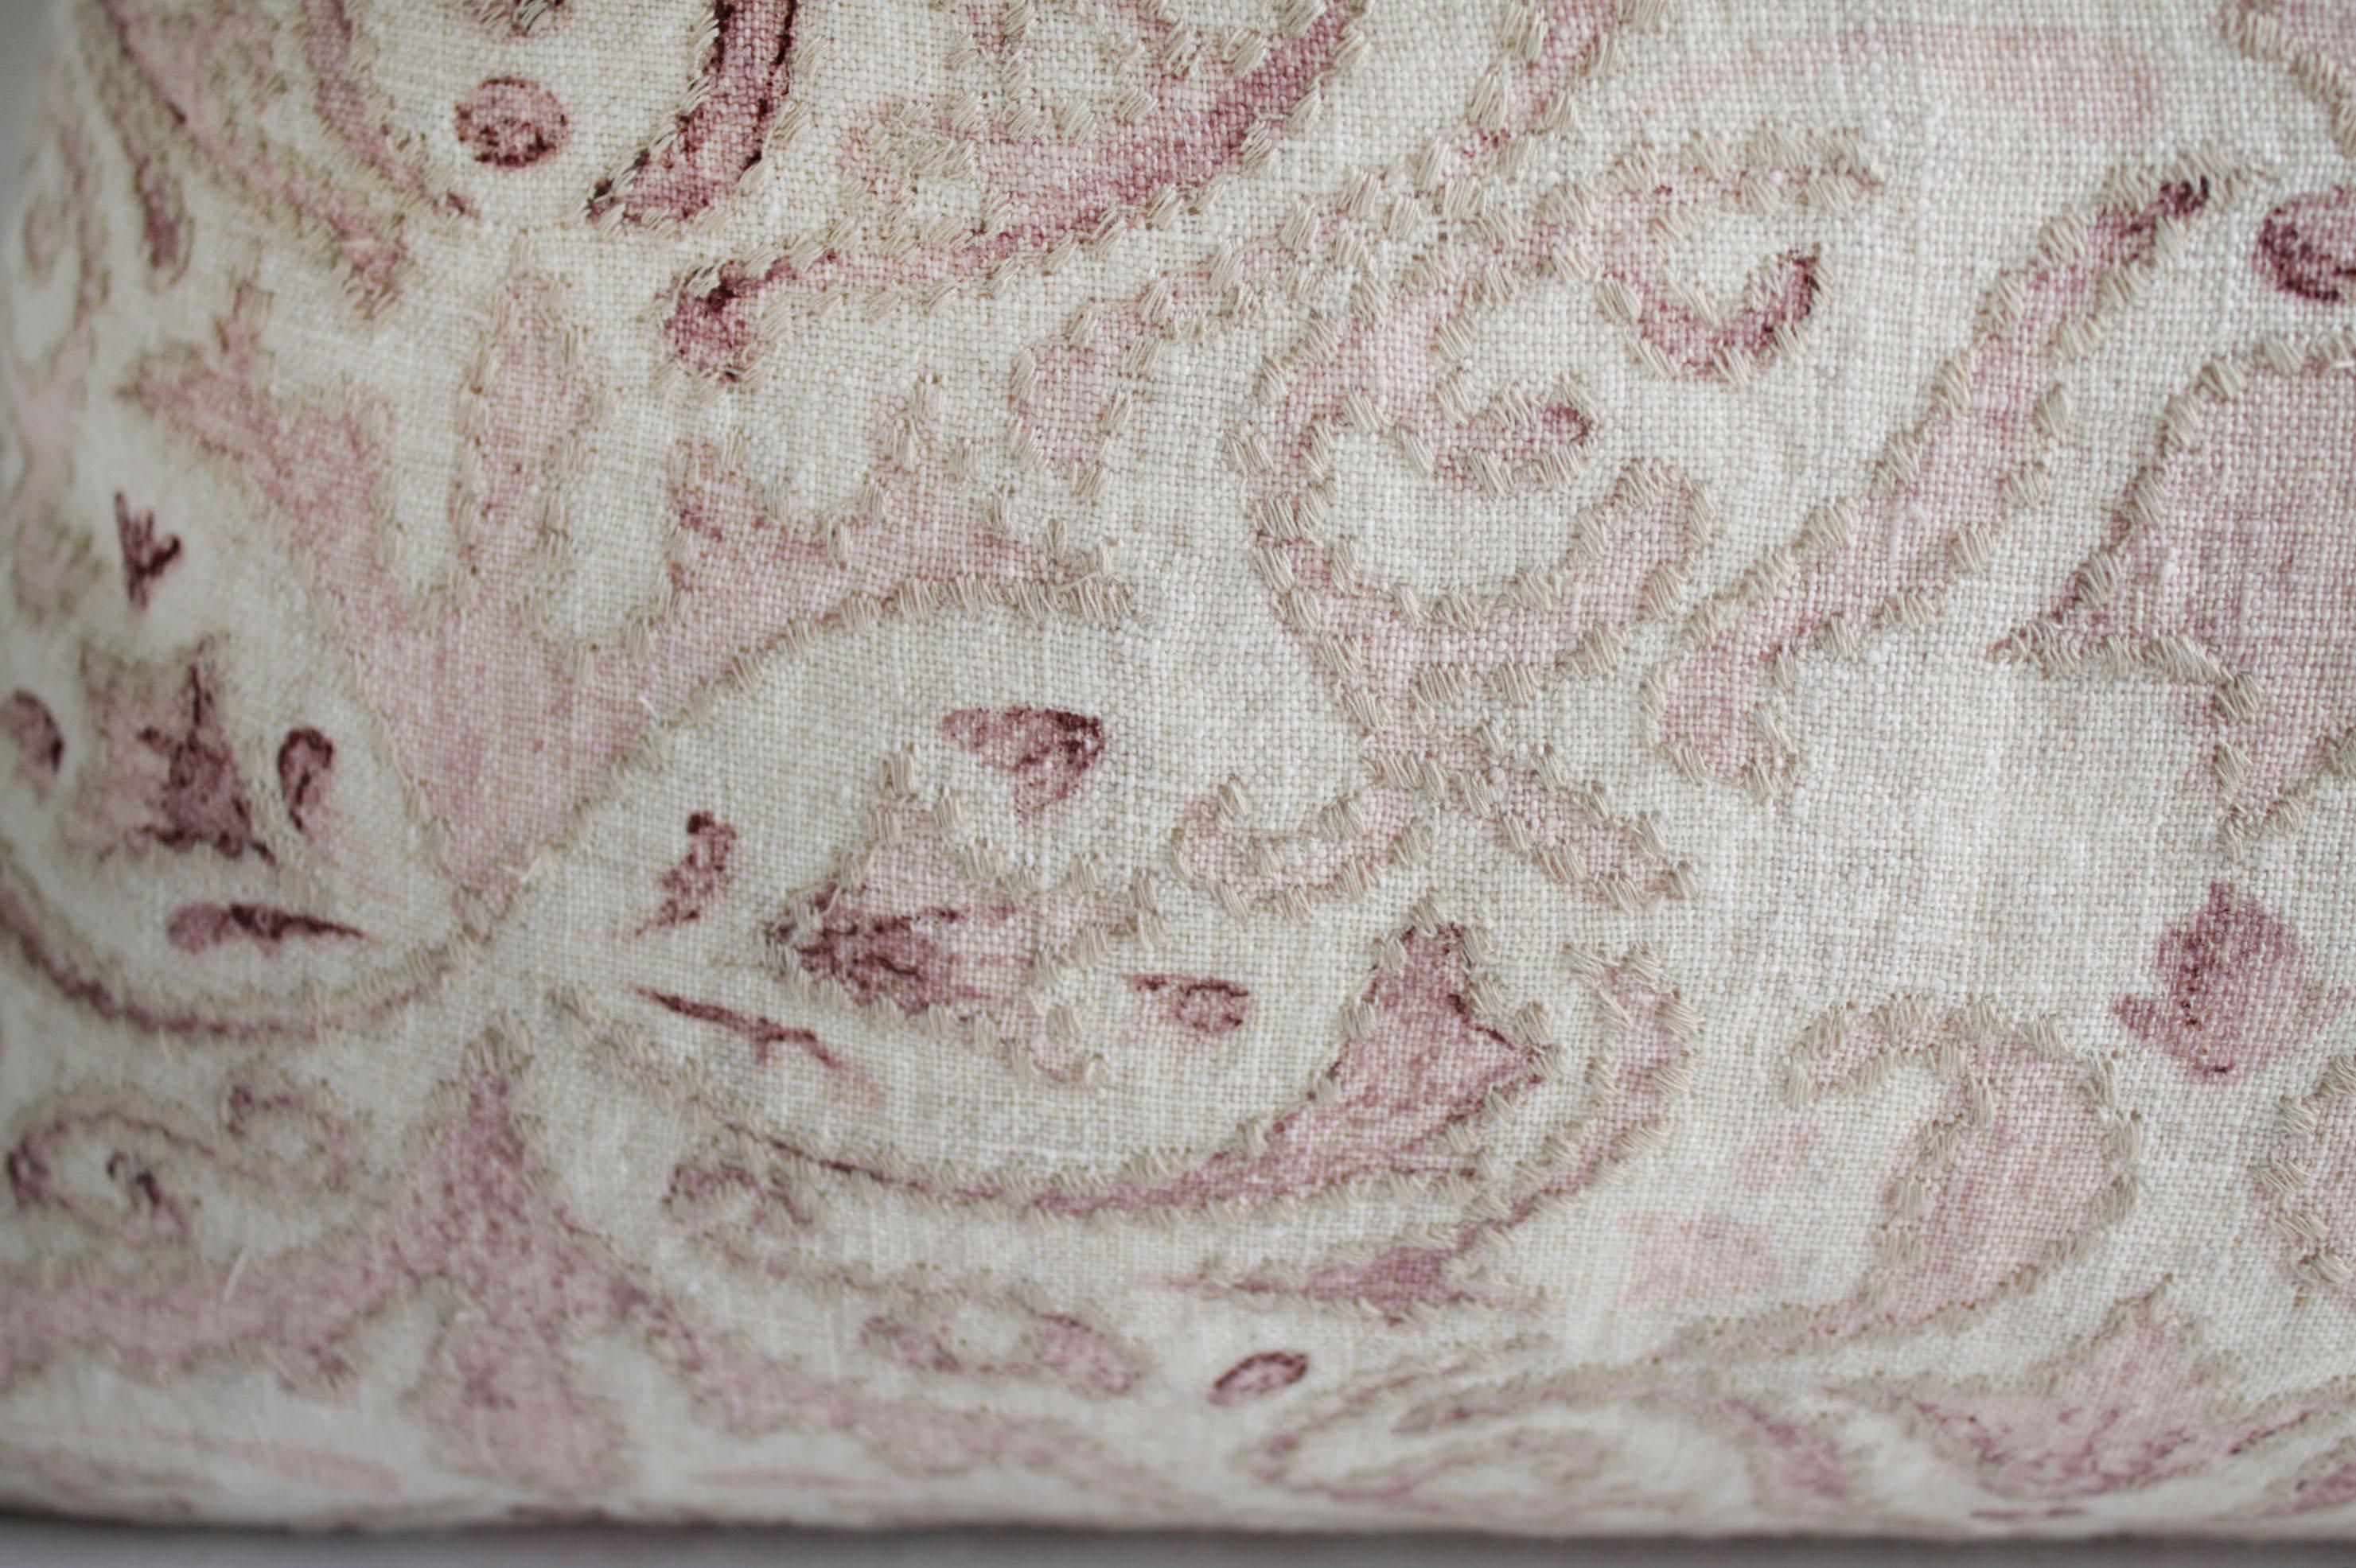 Contemporary Embroidered Linen Pillow Cover in Blush Pinks and Natural Linen